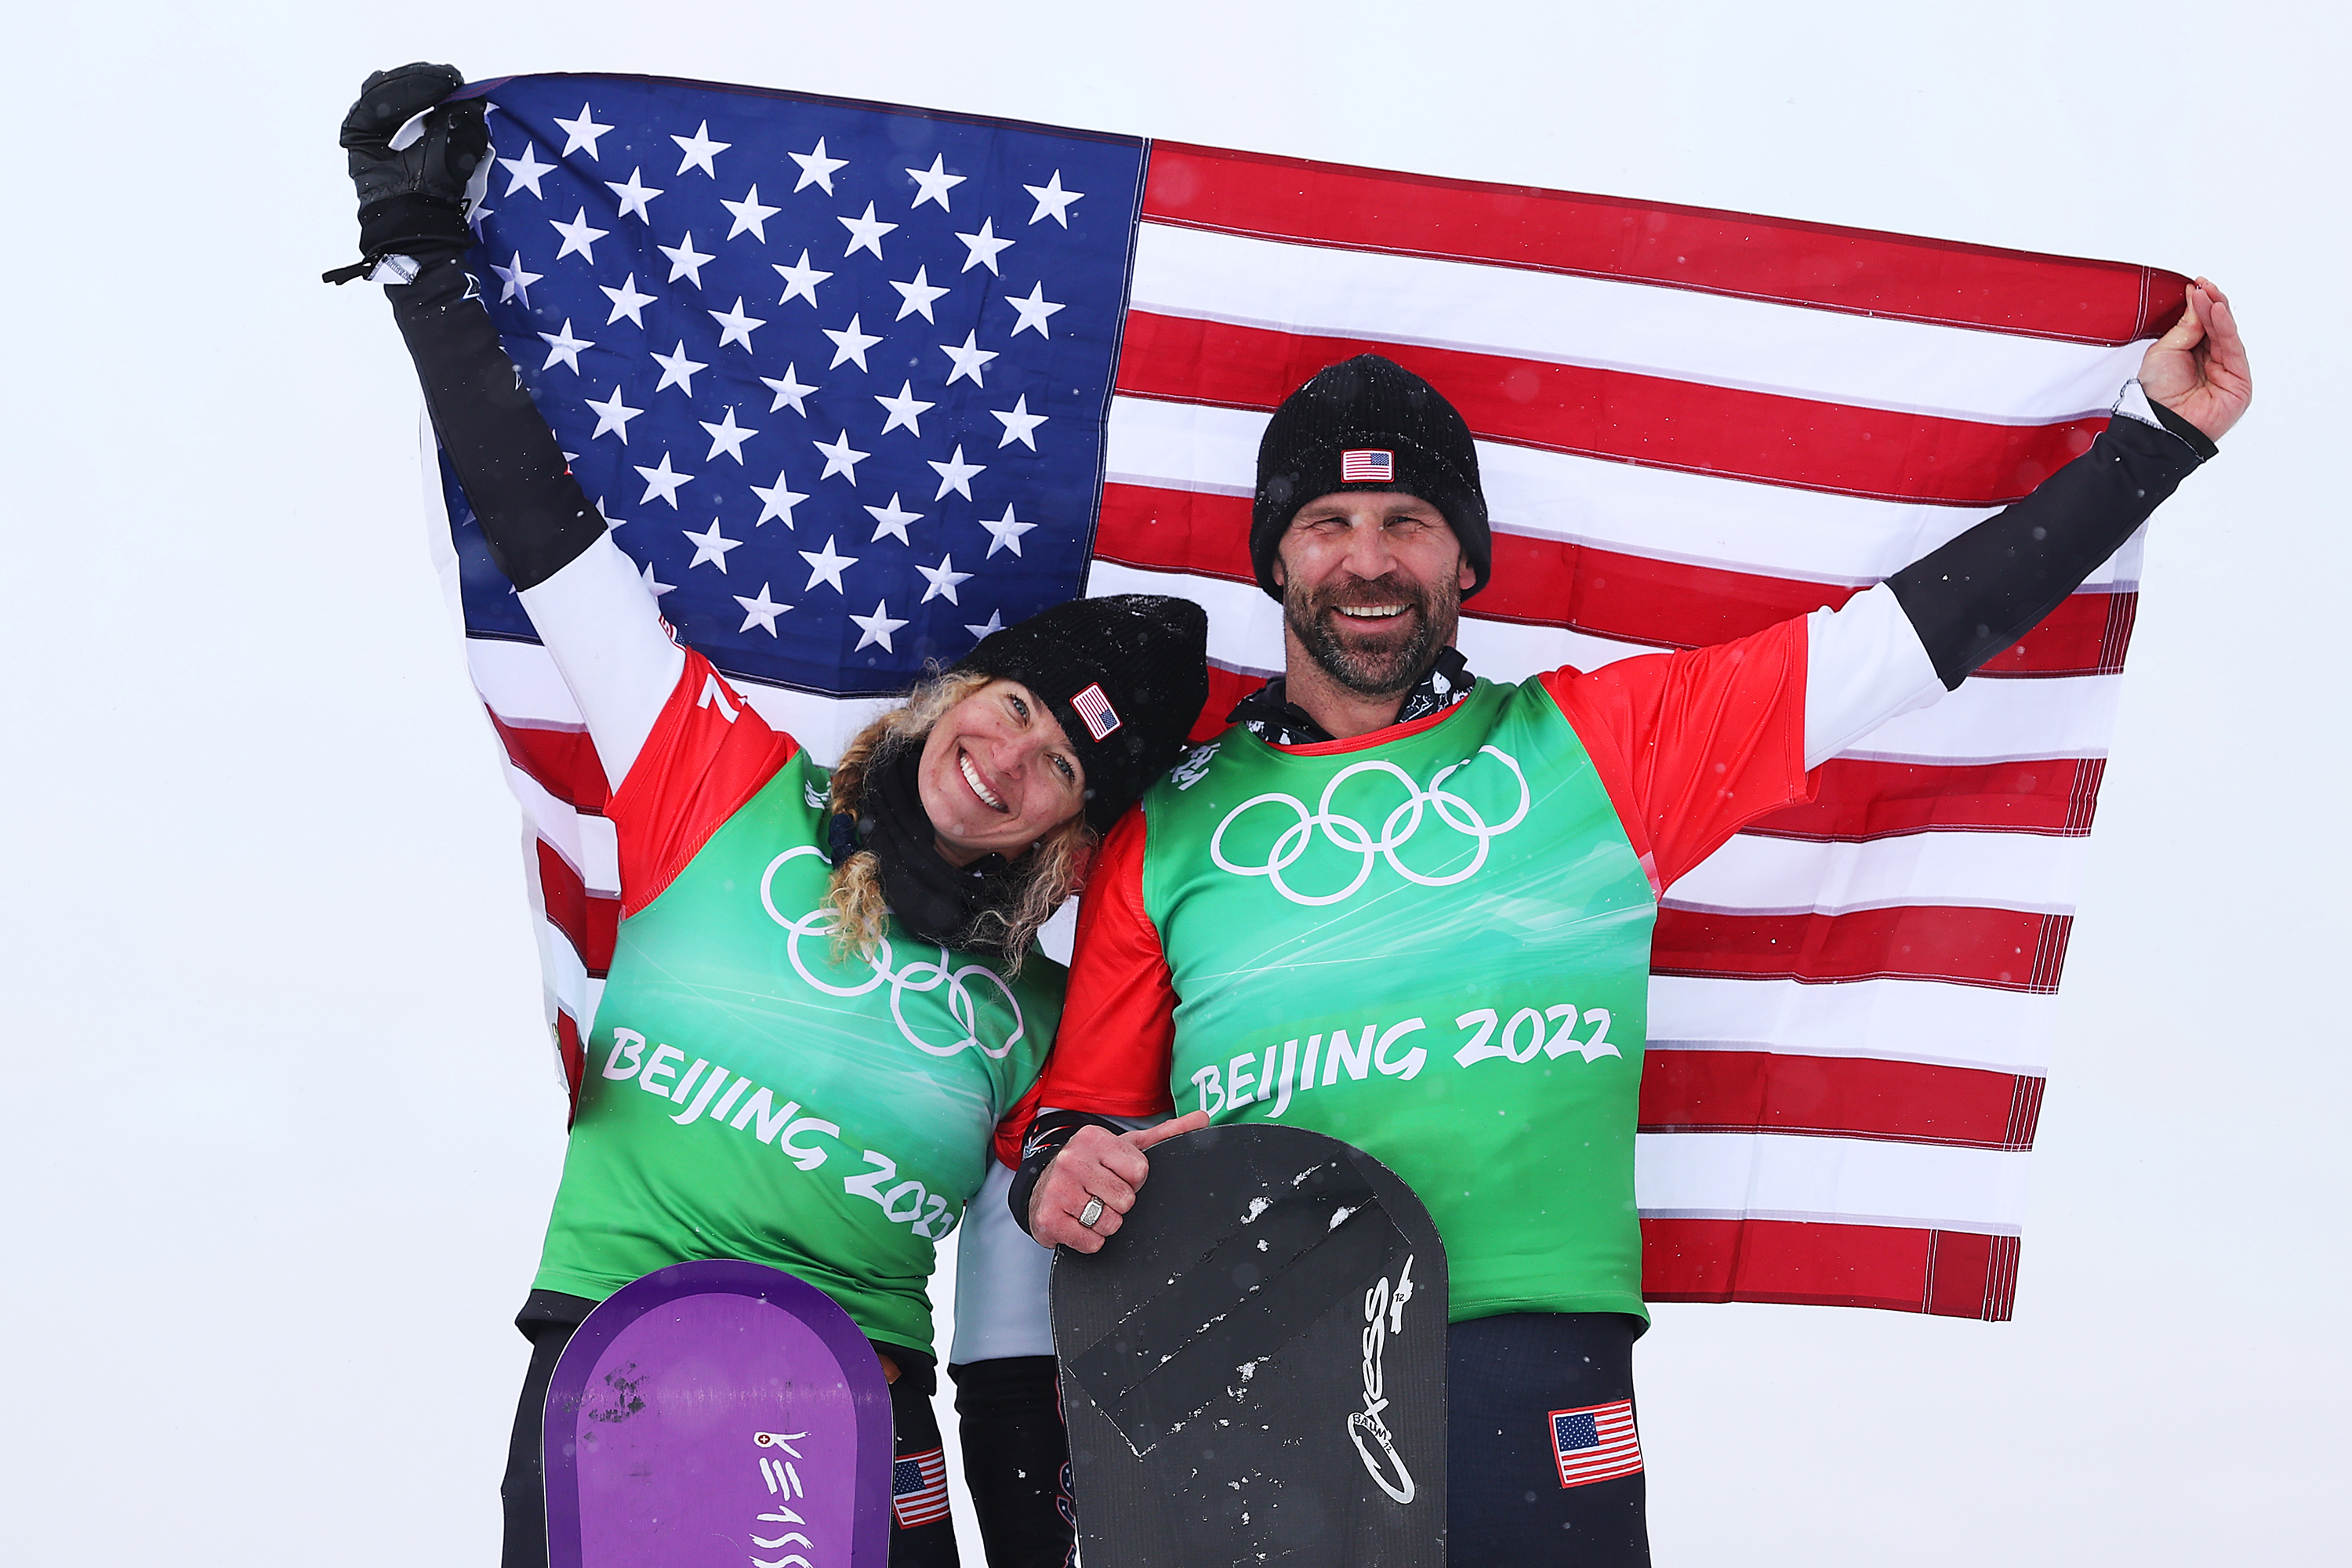 Team USA's Lindsey Jacobellis and Nick Baumgartner celebrate during the mixed team snowboard cross final flower ceremony on Feb. 12.